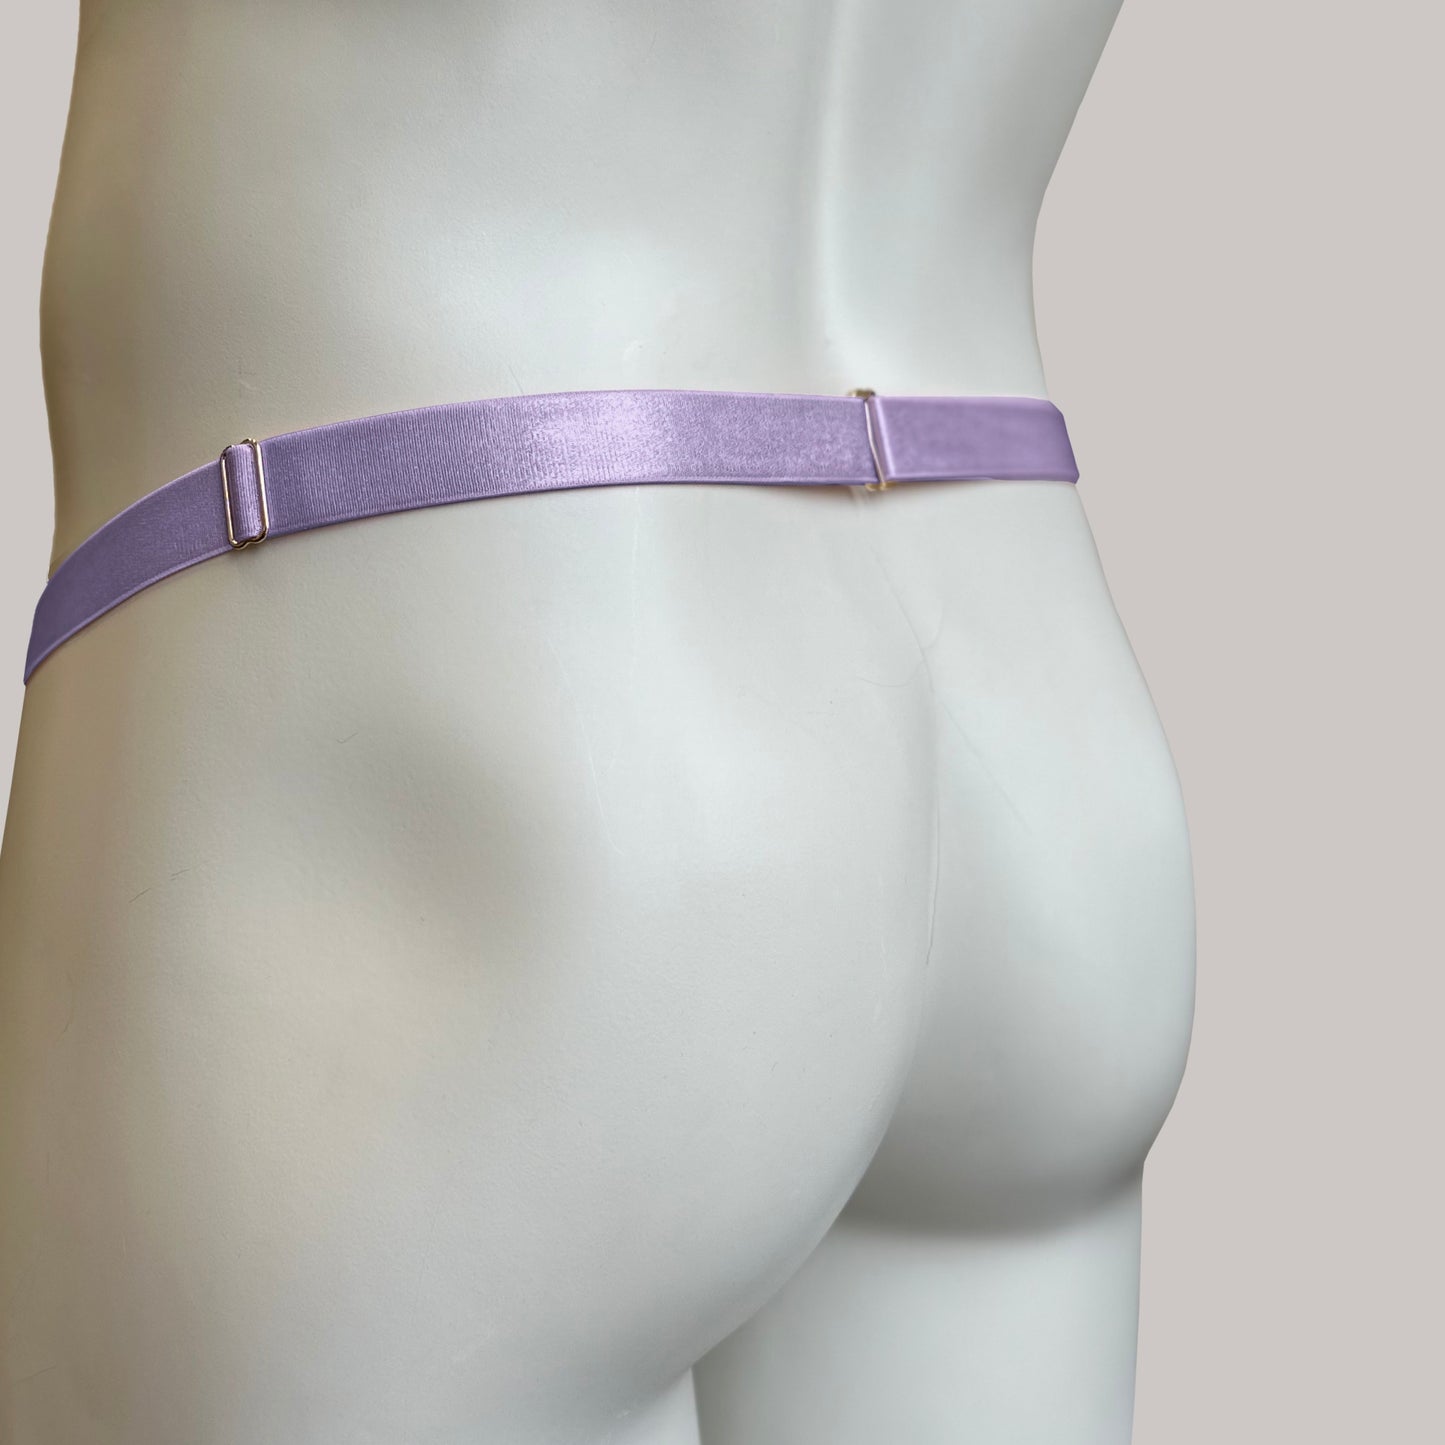 Male Two Straps Chastity Cage Belt Violet